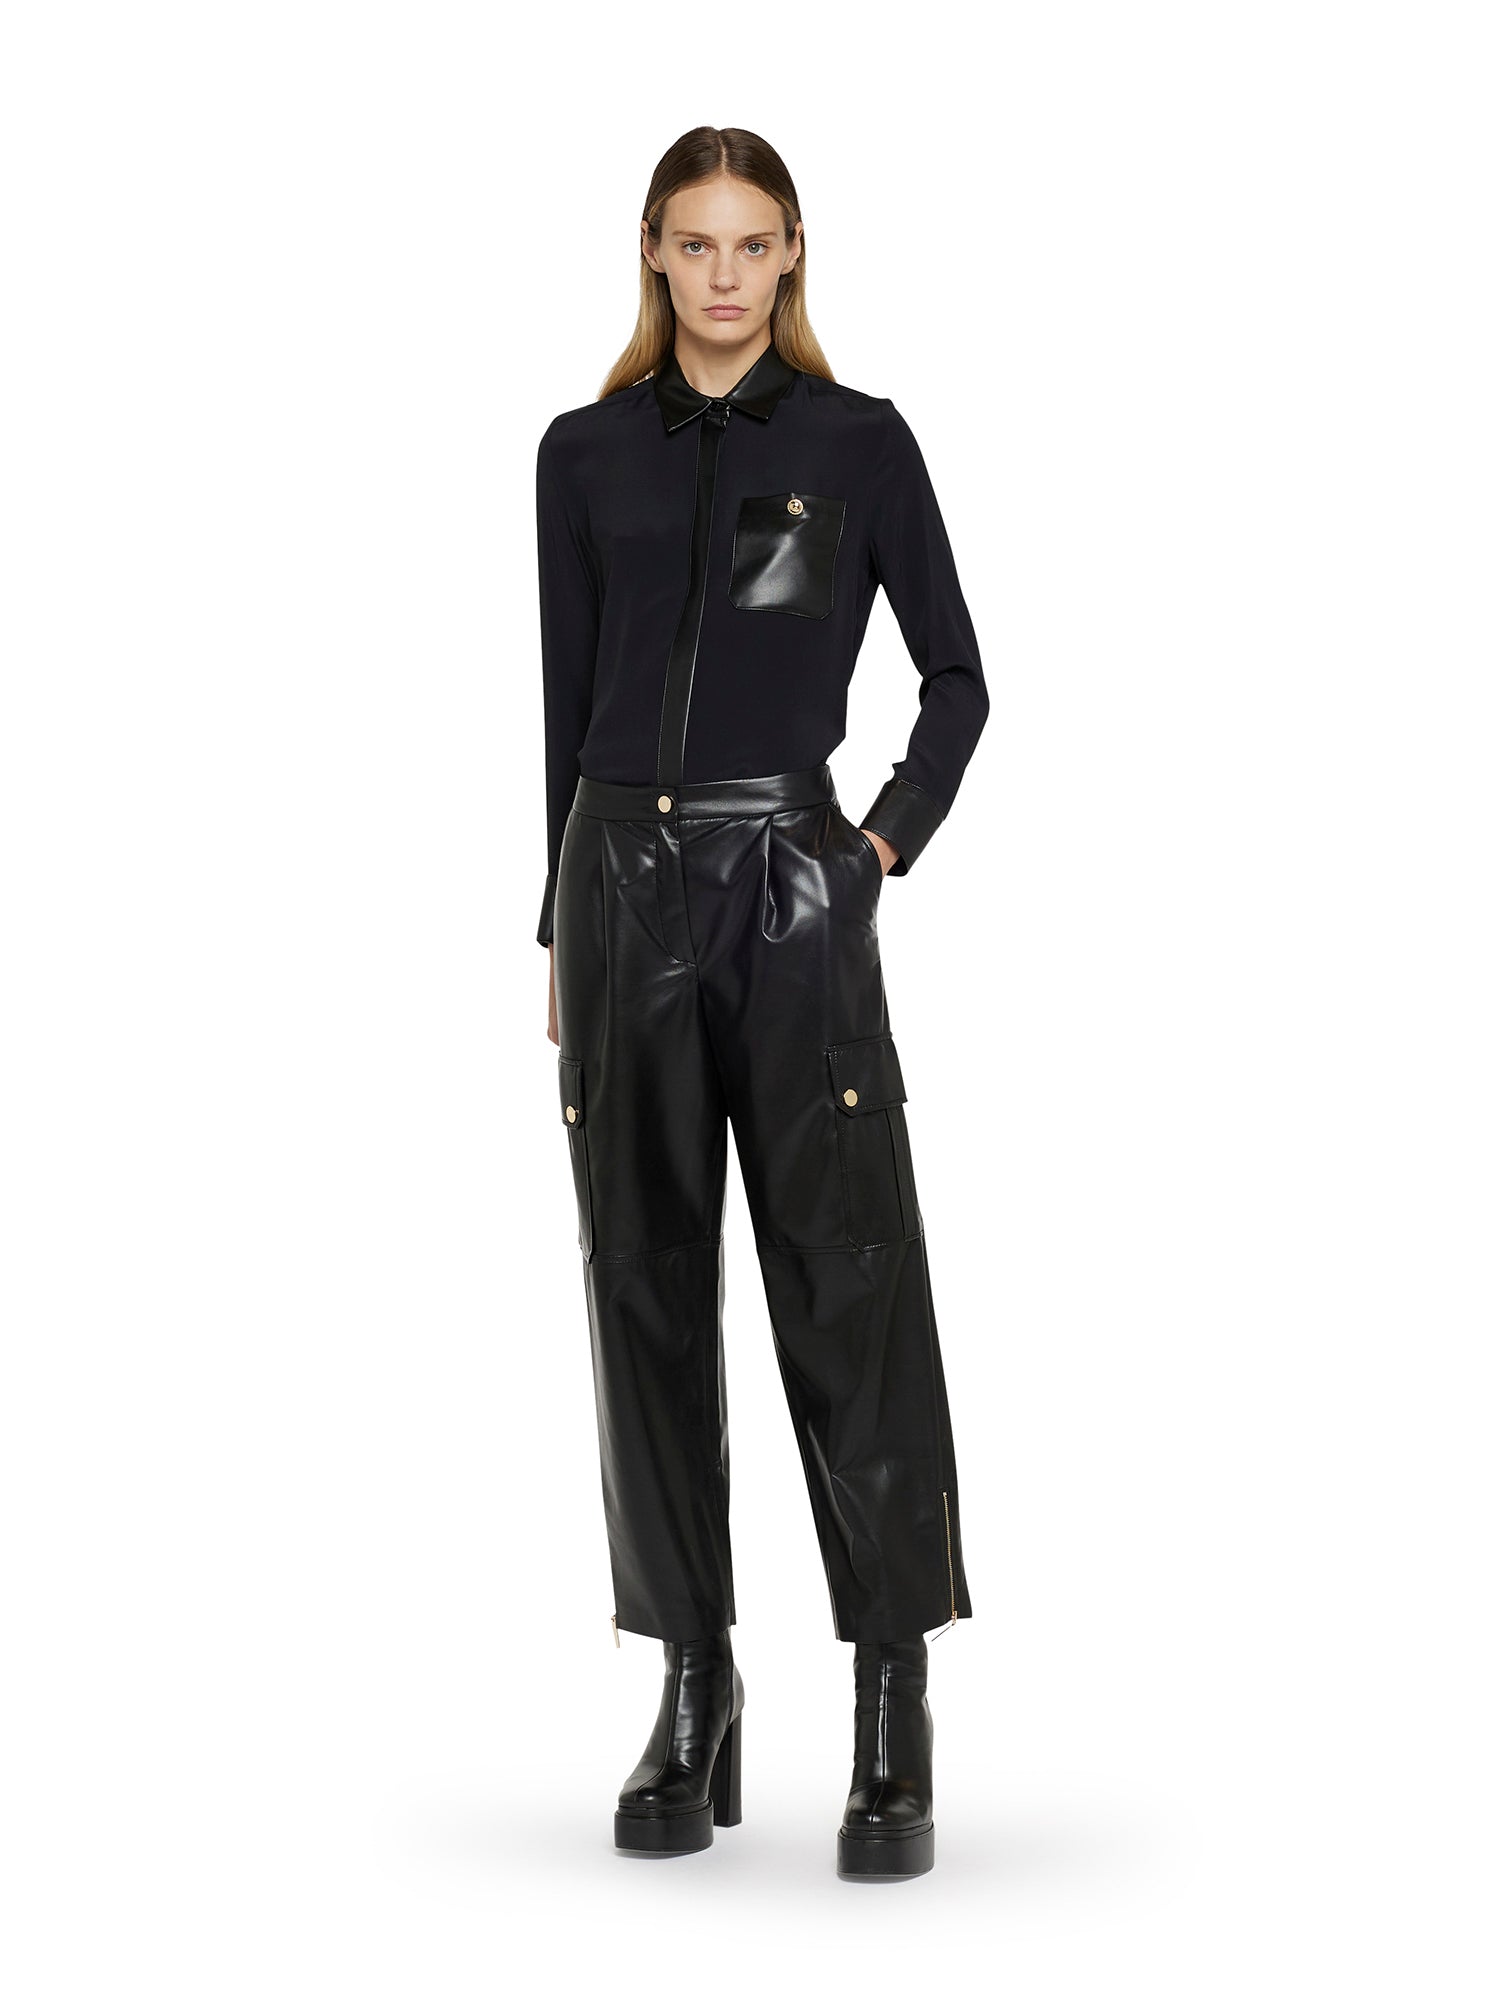 Silk acetate shirt with faux leather details